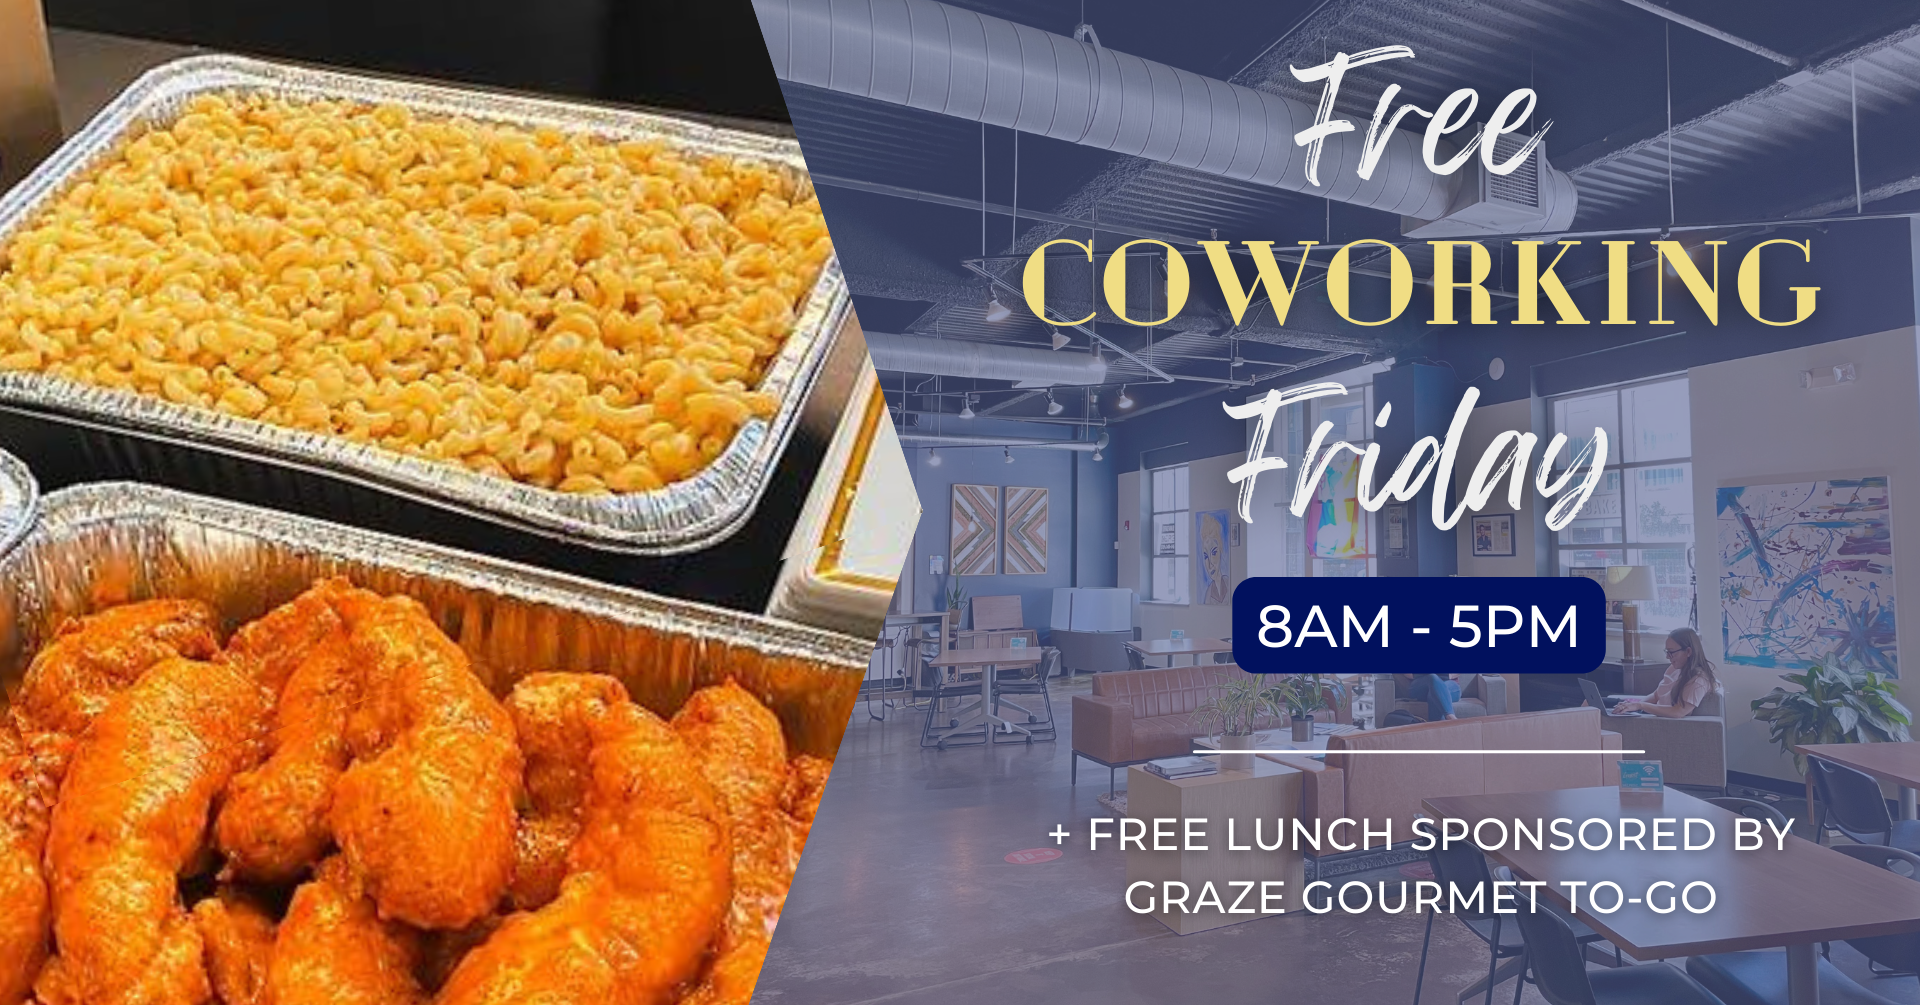 Free Coworking Friday (+ Lunch) @ MERGE